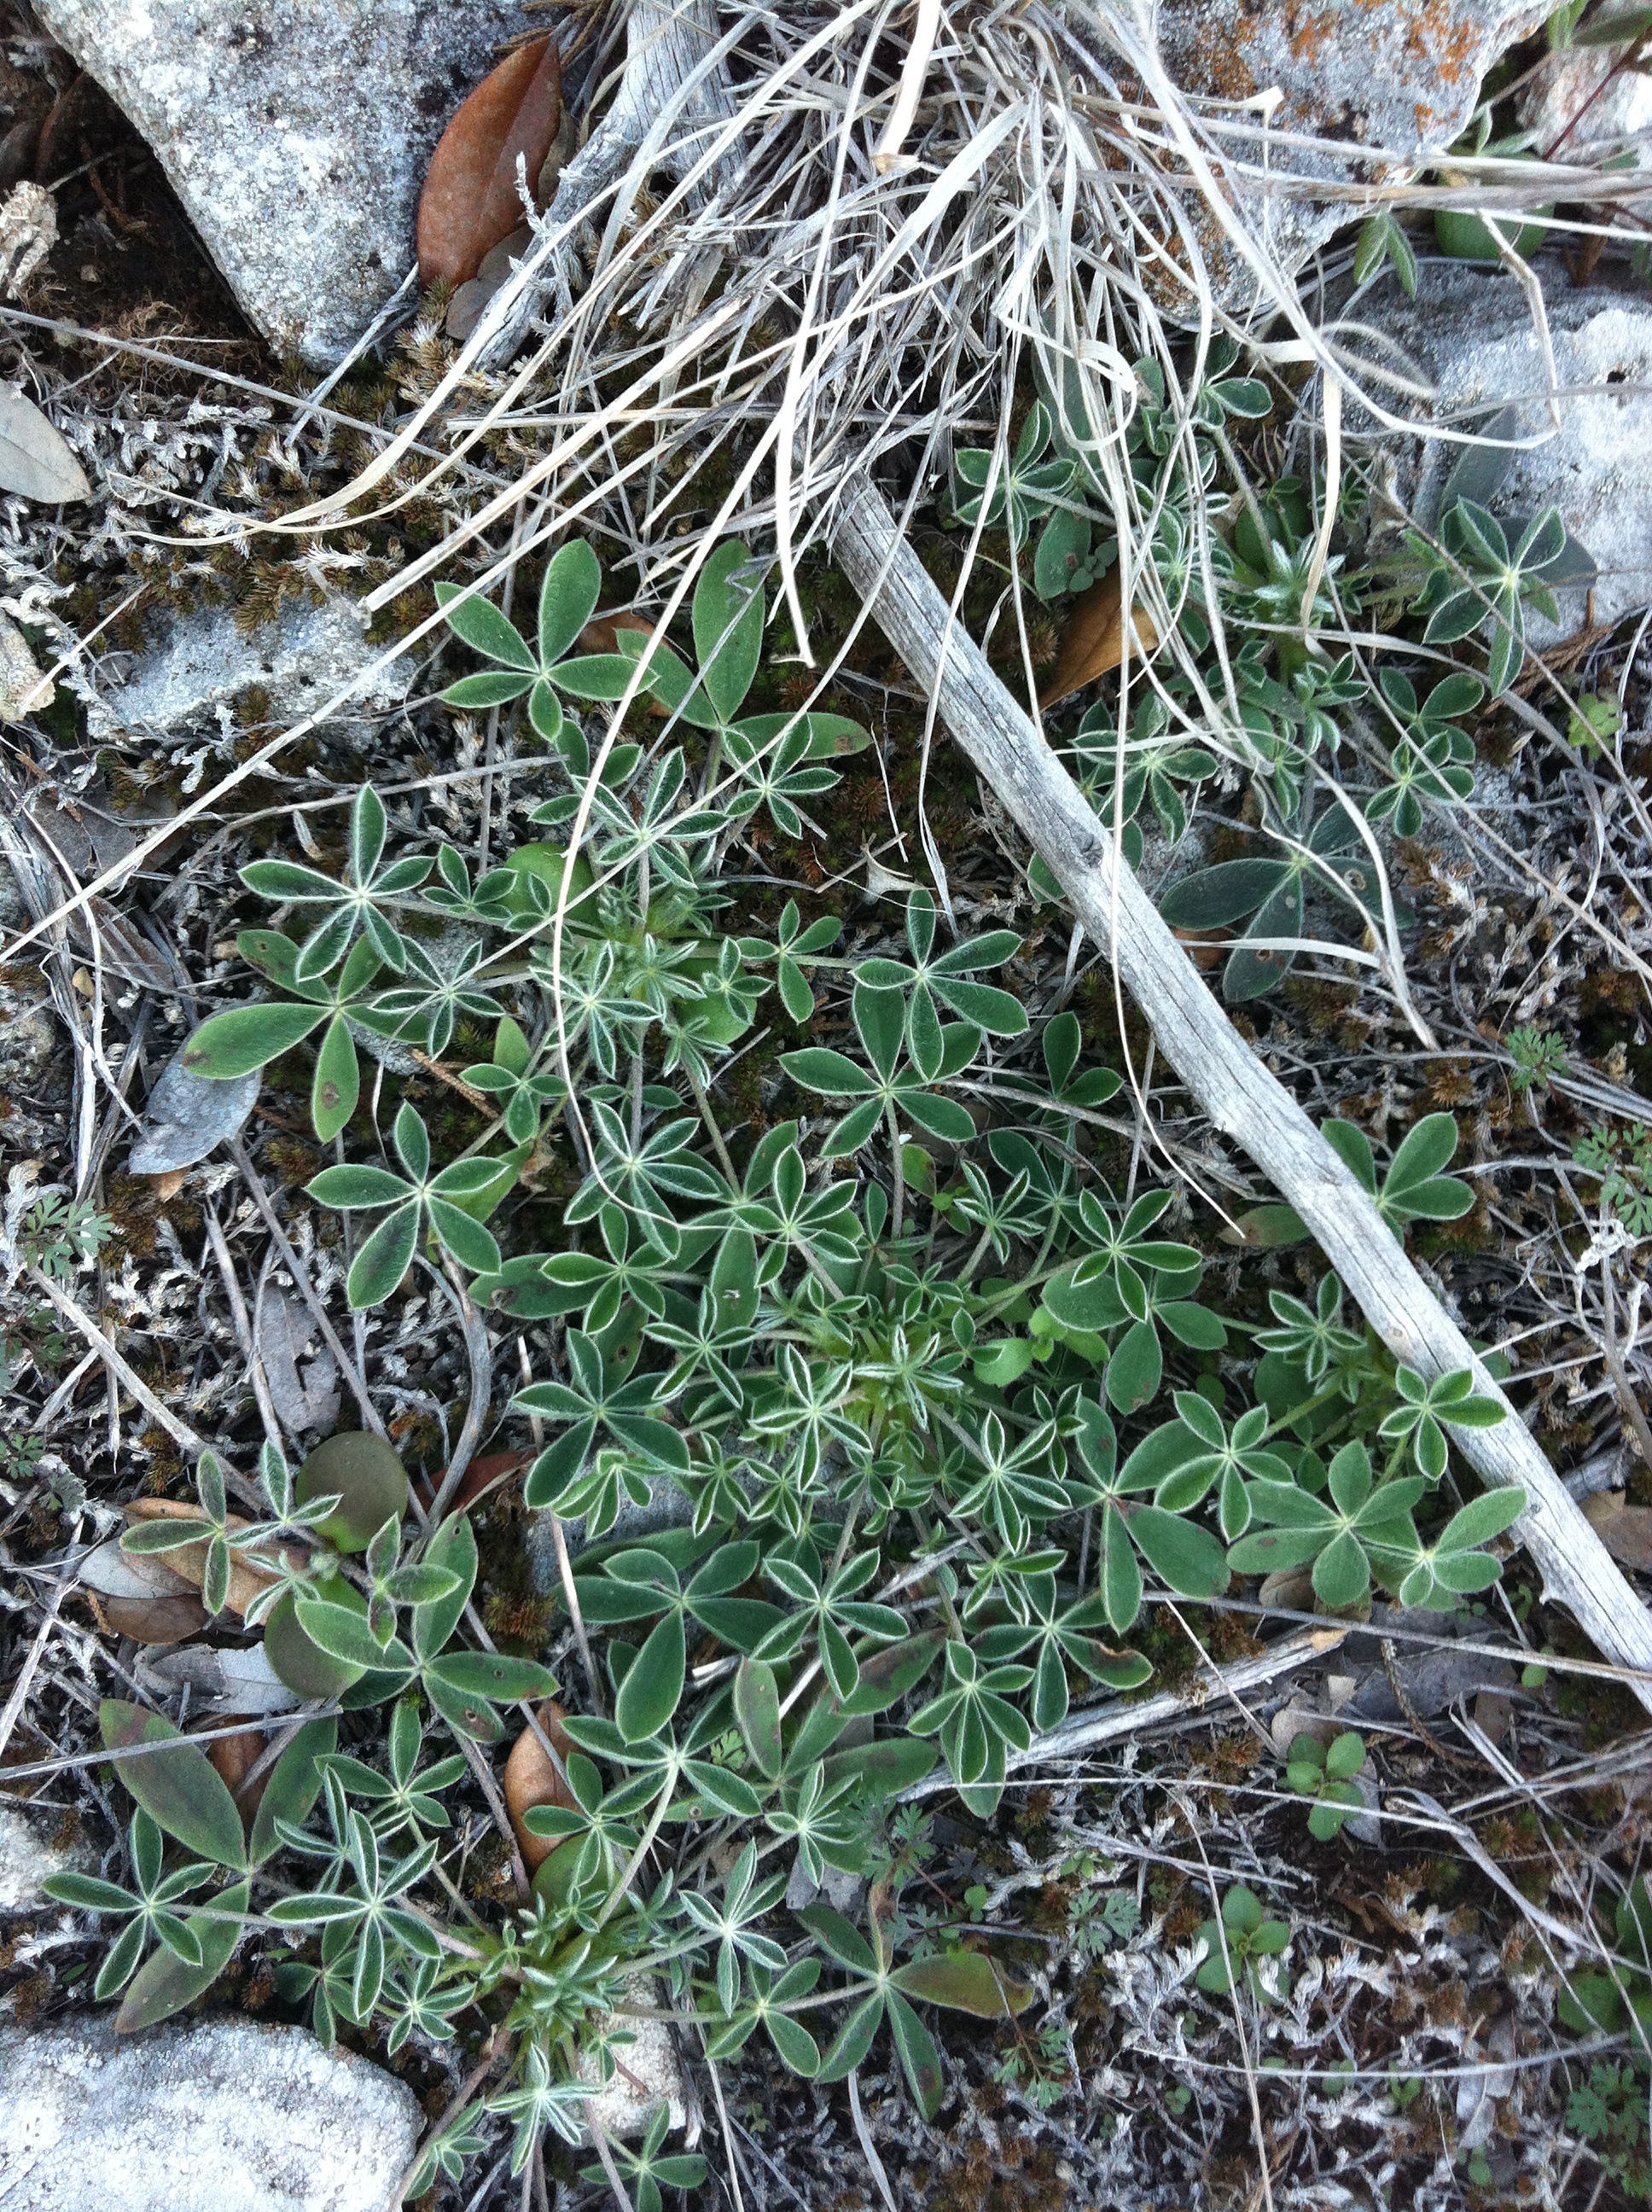 Bluebonnet rosettes are already showing in January